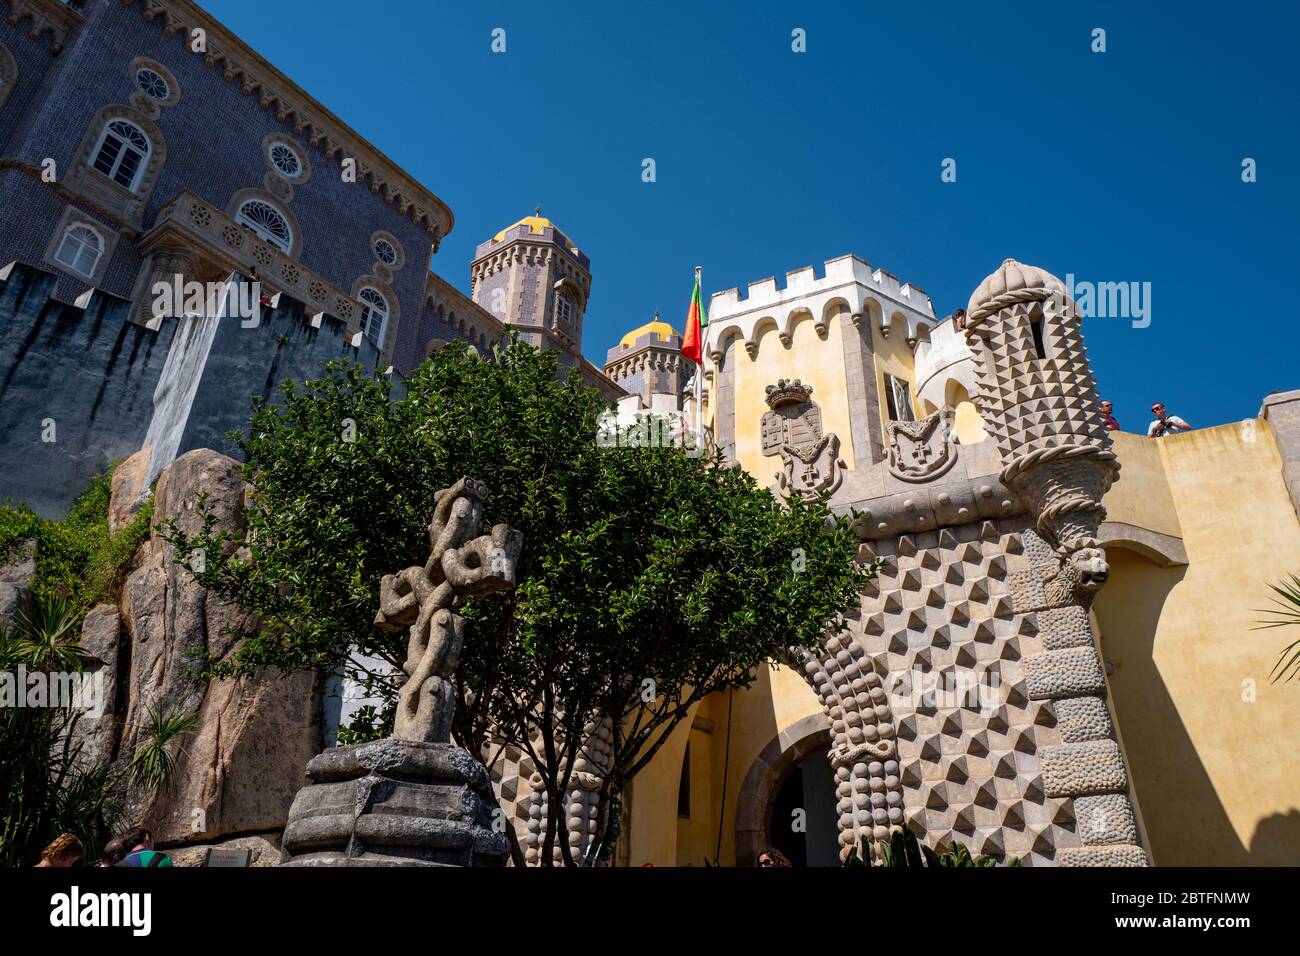 Europe, Portugal, Sintra. Views of the Pena Palace in Sintra. Stock Photo